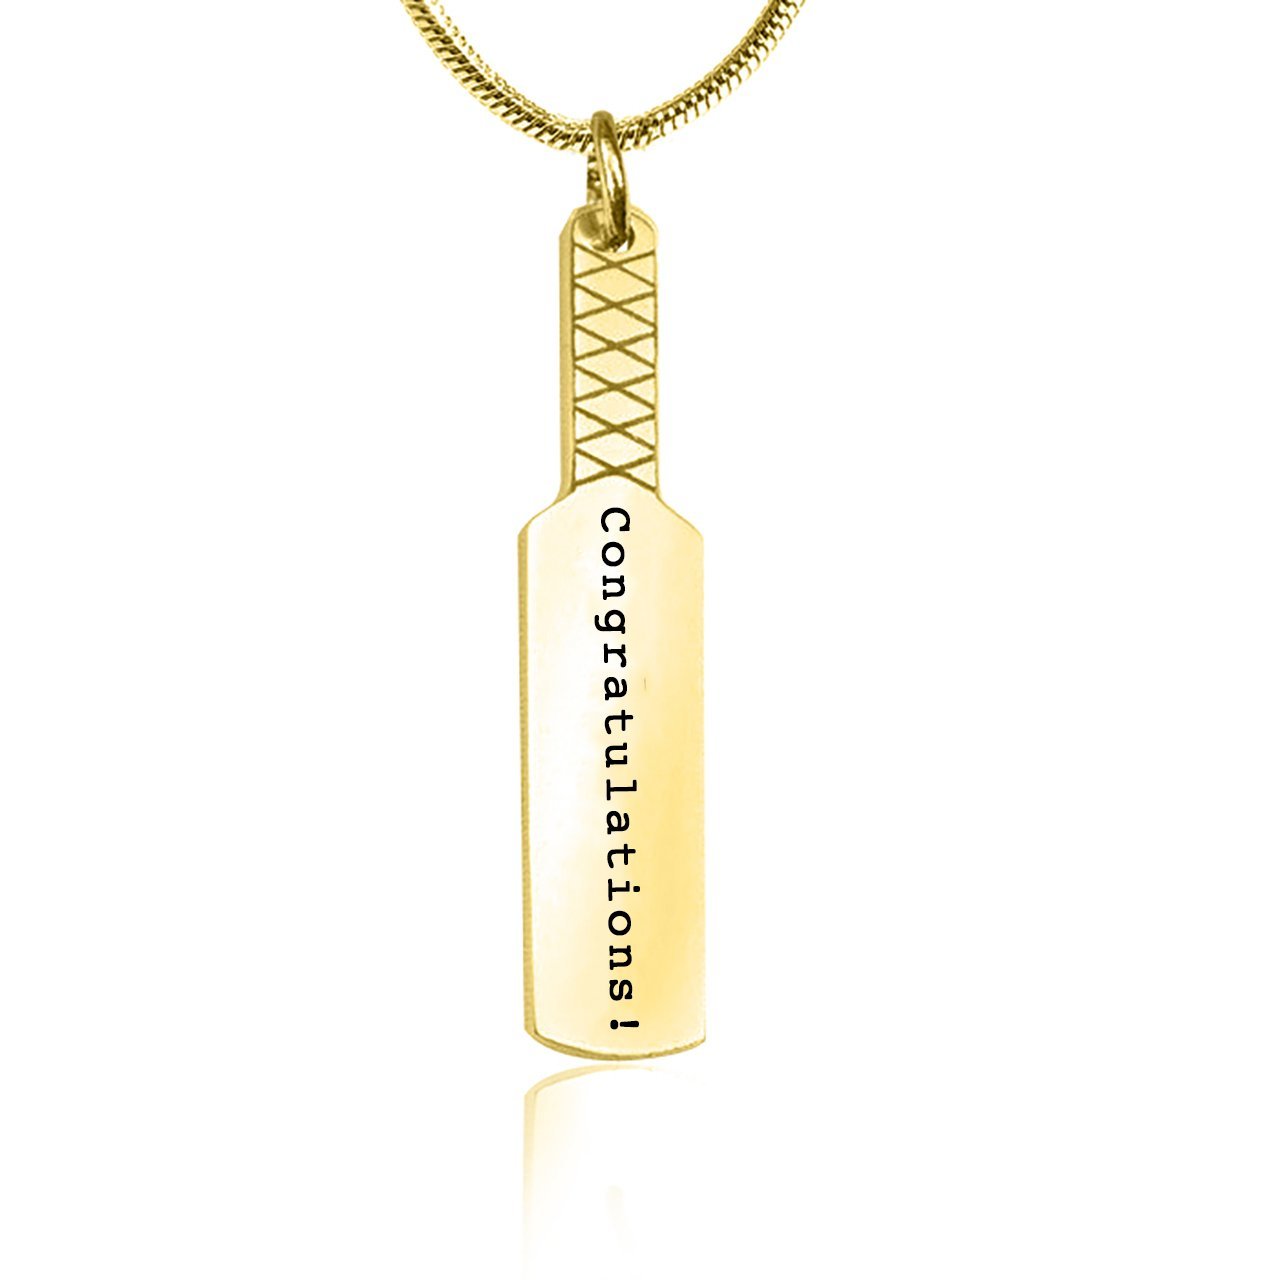 Cricket Bat Name Necklace - Name Necklaces by Belle Fever